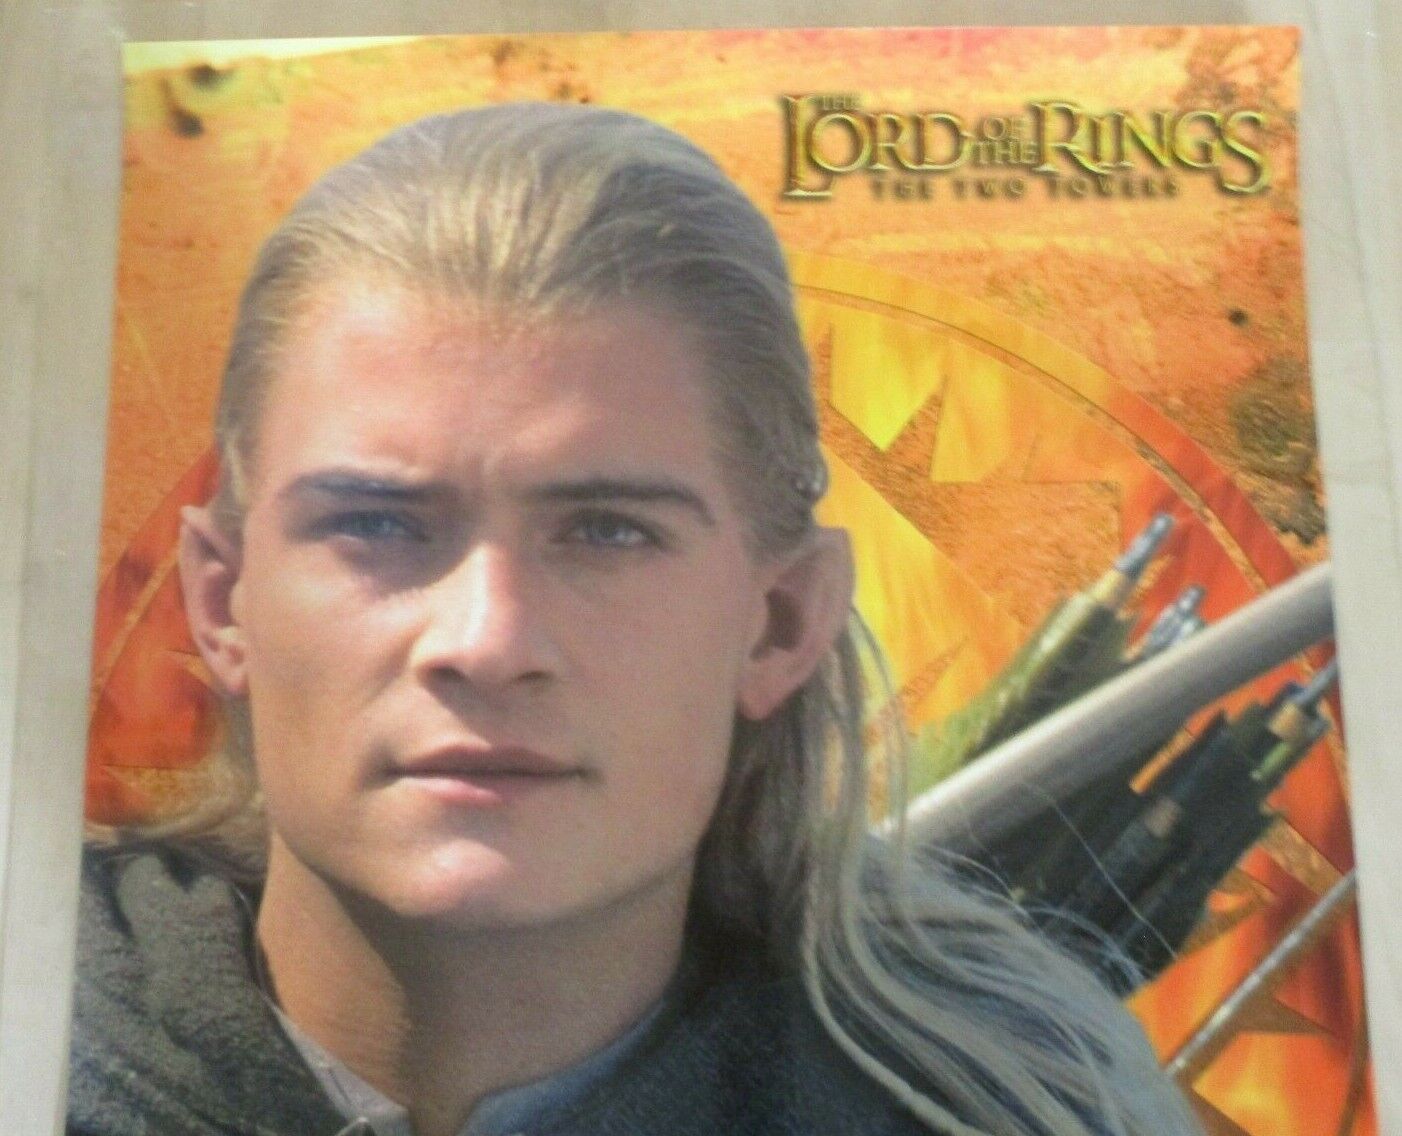 The Lord Of The Rings Legolas Vintage 2002 UK Import Poster 24 x 35